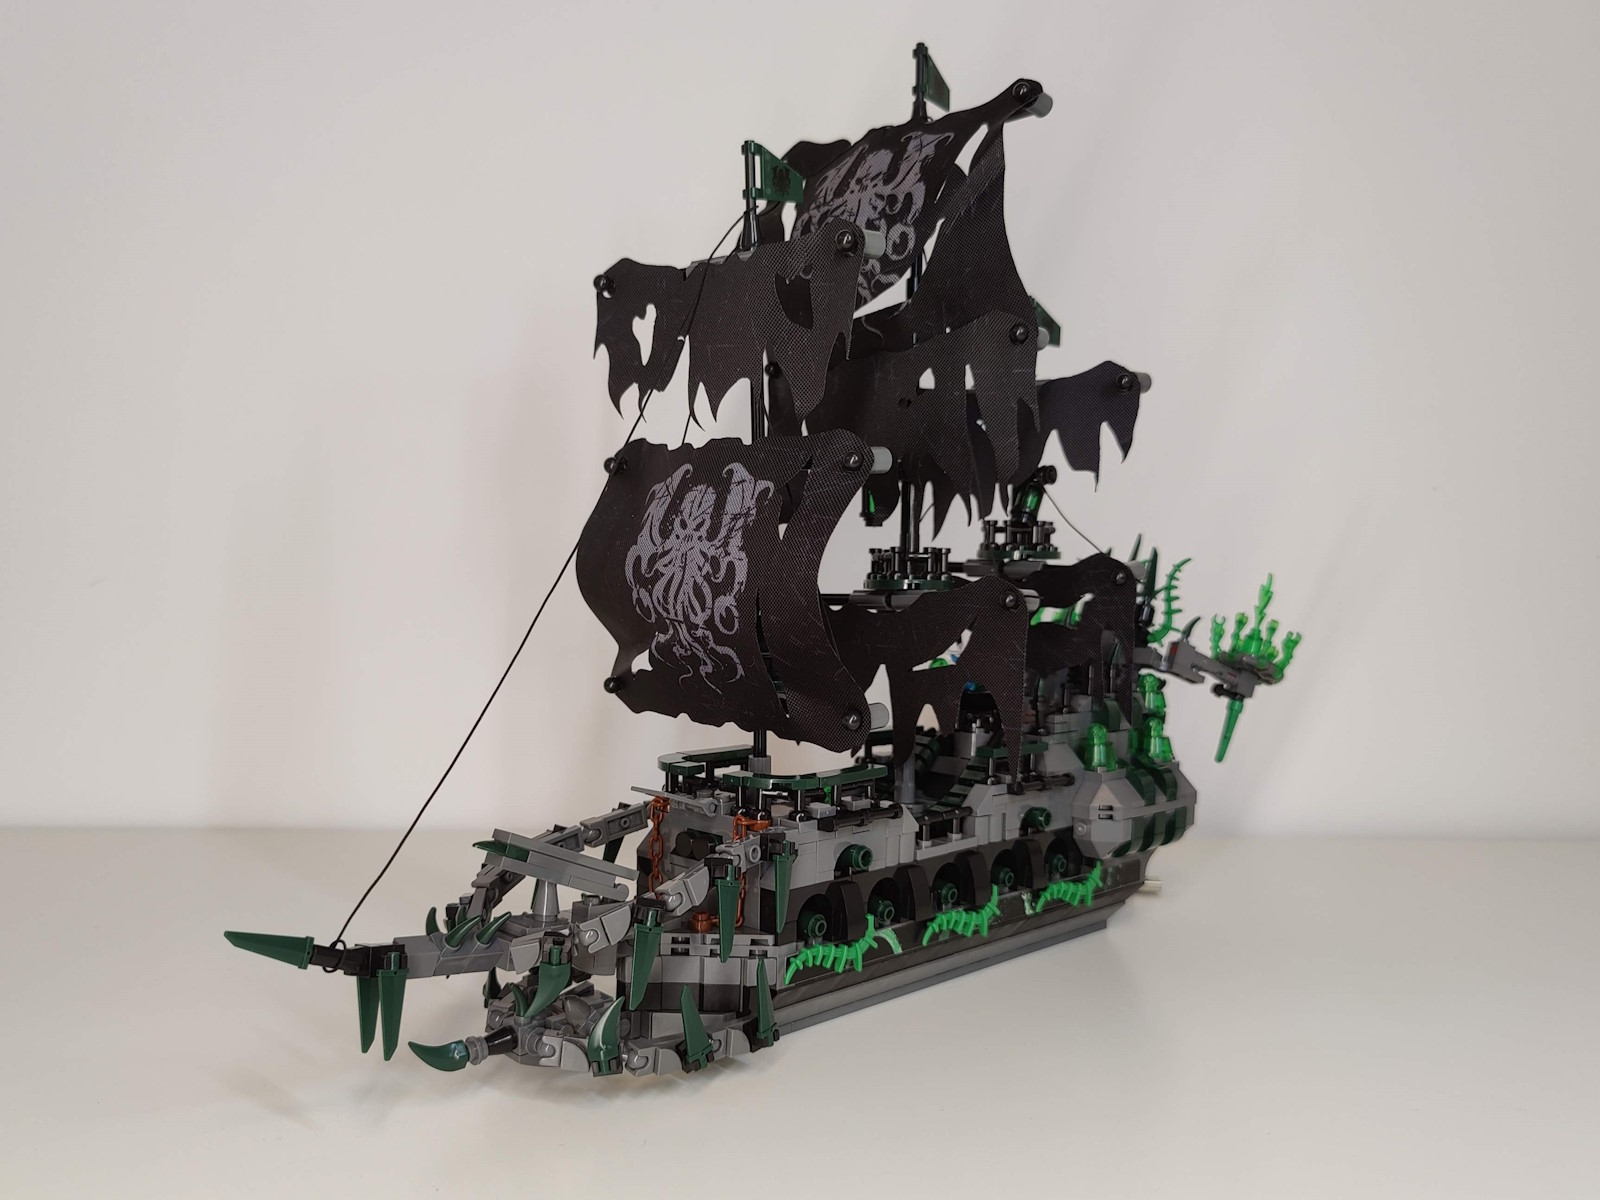 JMBricklayer Ghost Ship review: A great, spooky build